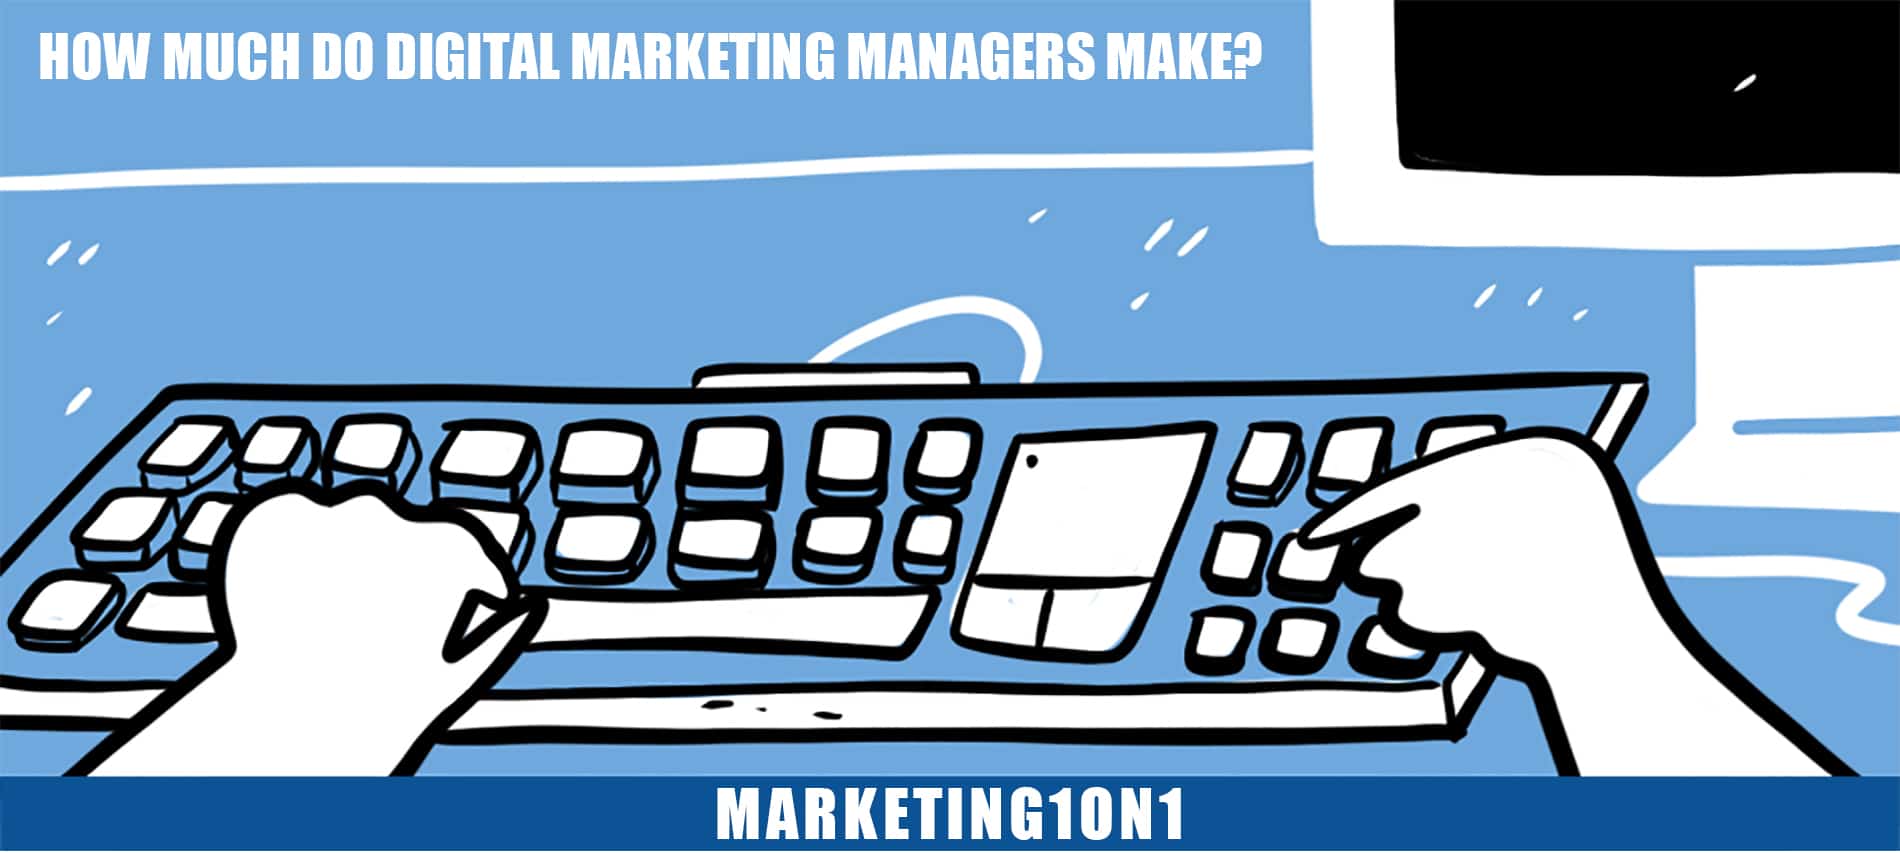 How much do digital marketing managers make?